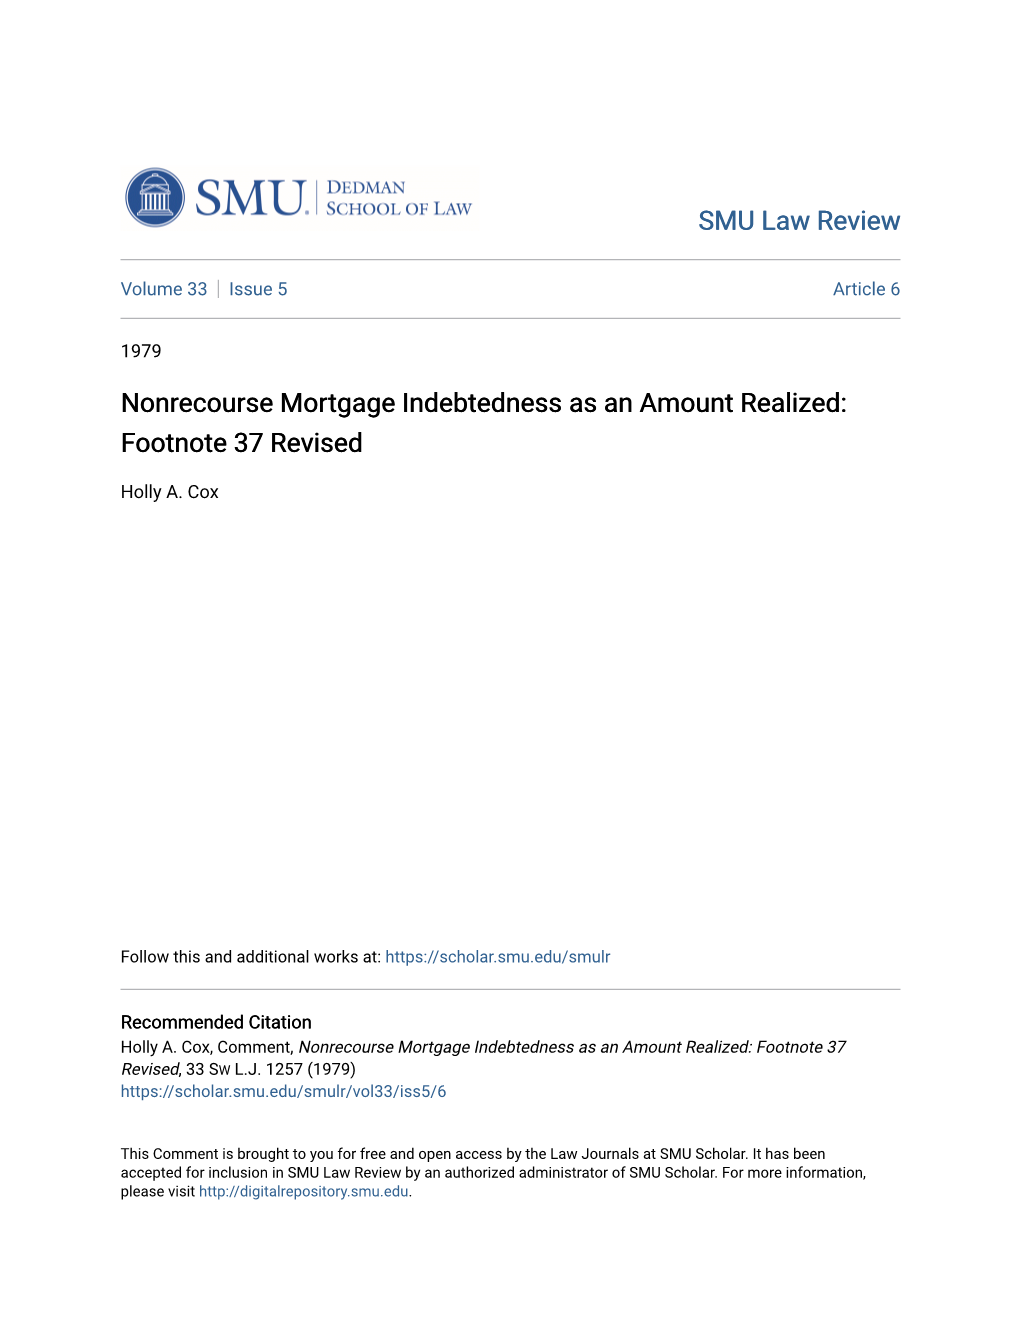 Nonrecourse Mortgage Indebtedness As an Amount Realized: Footnote 37 Revised